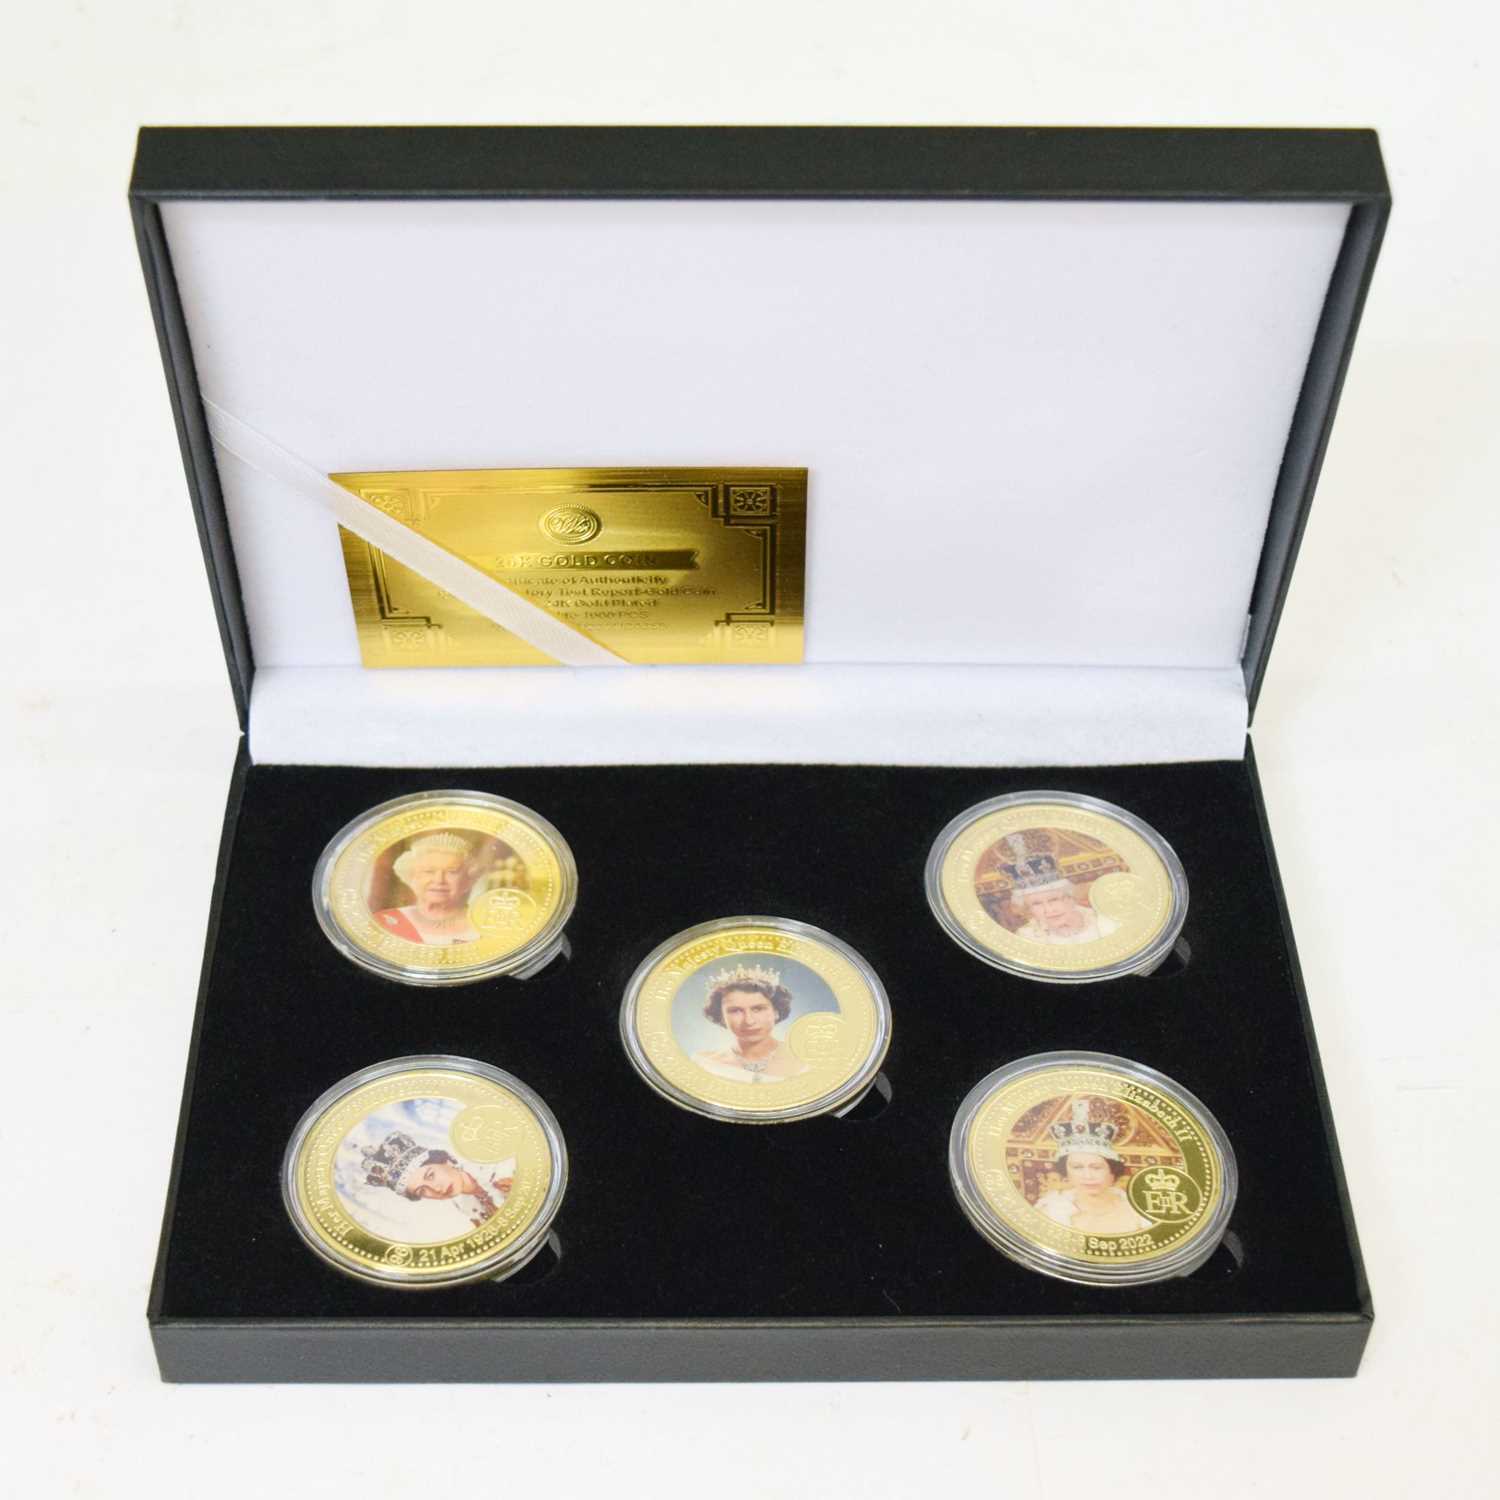 Gold-plated limited edition five-coin set commemorating Queen Elizabeth II